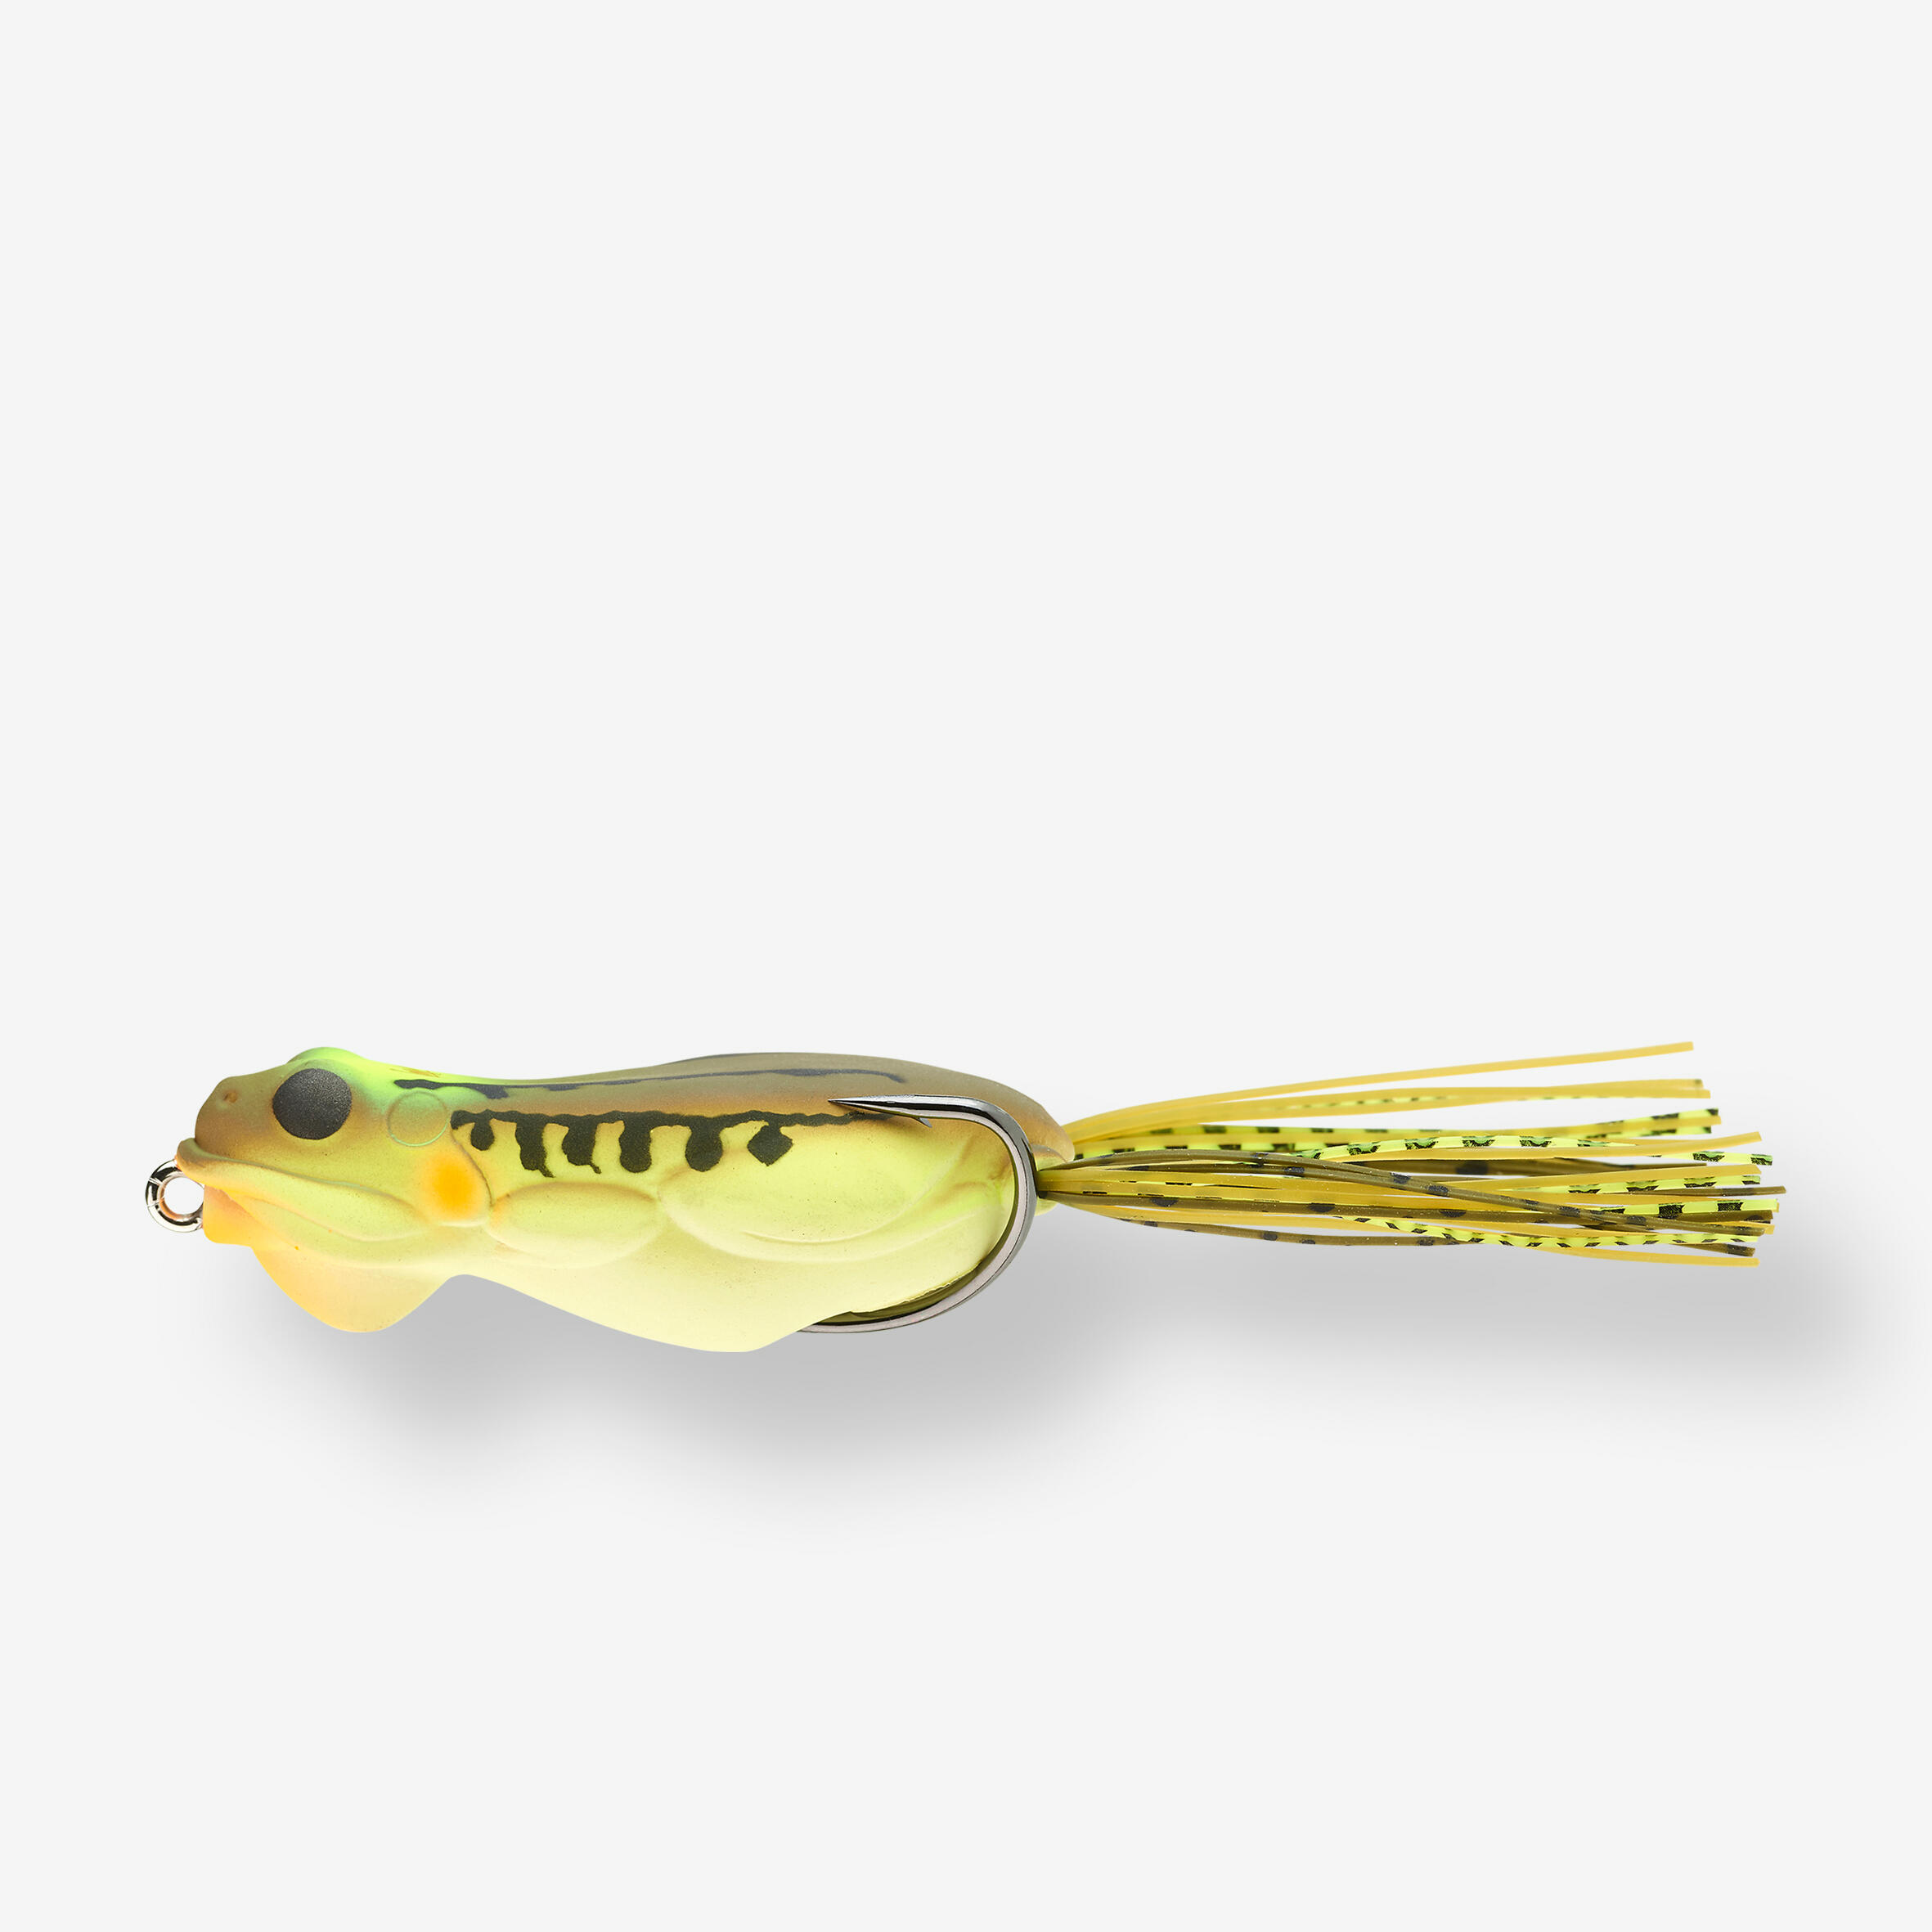 Soft lures